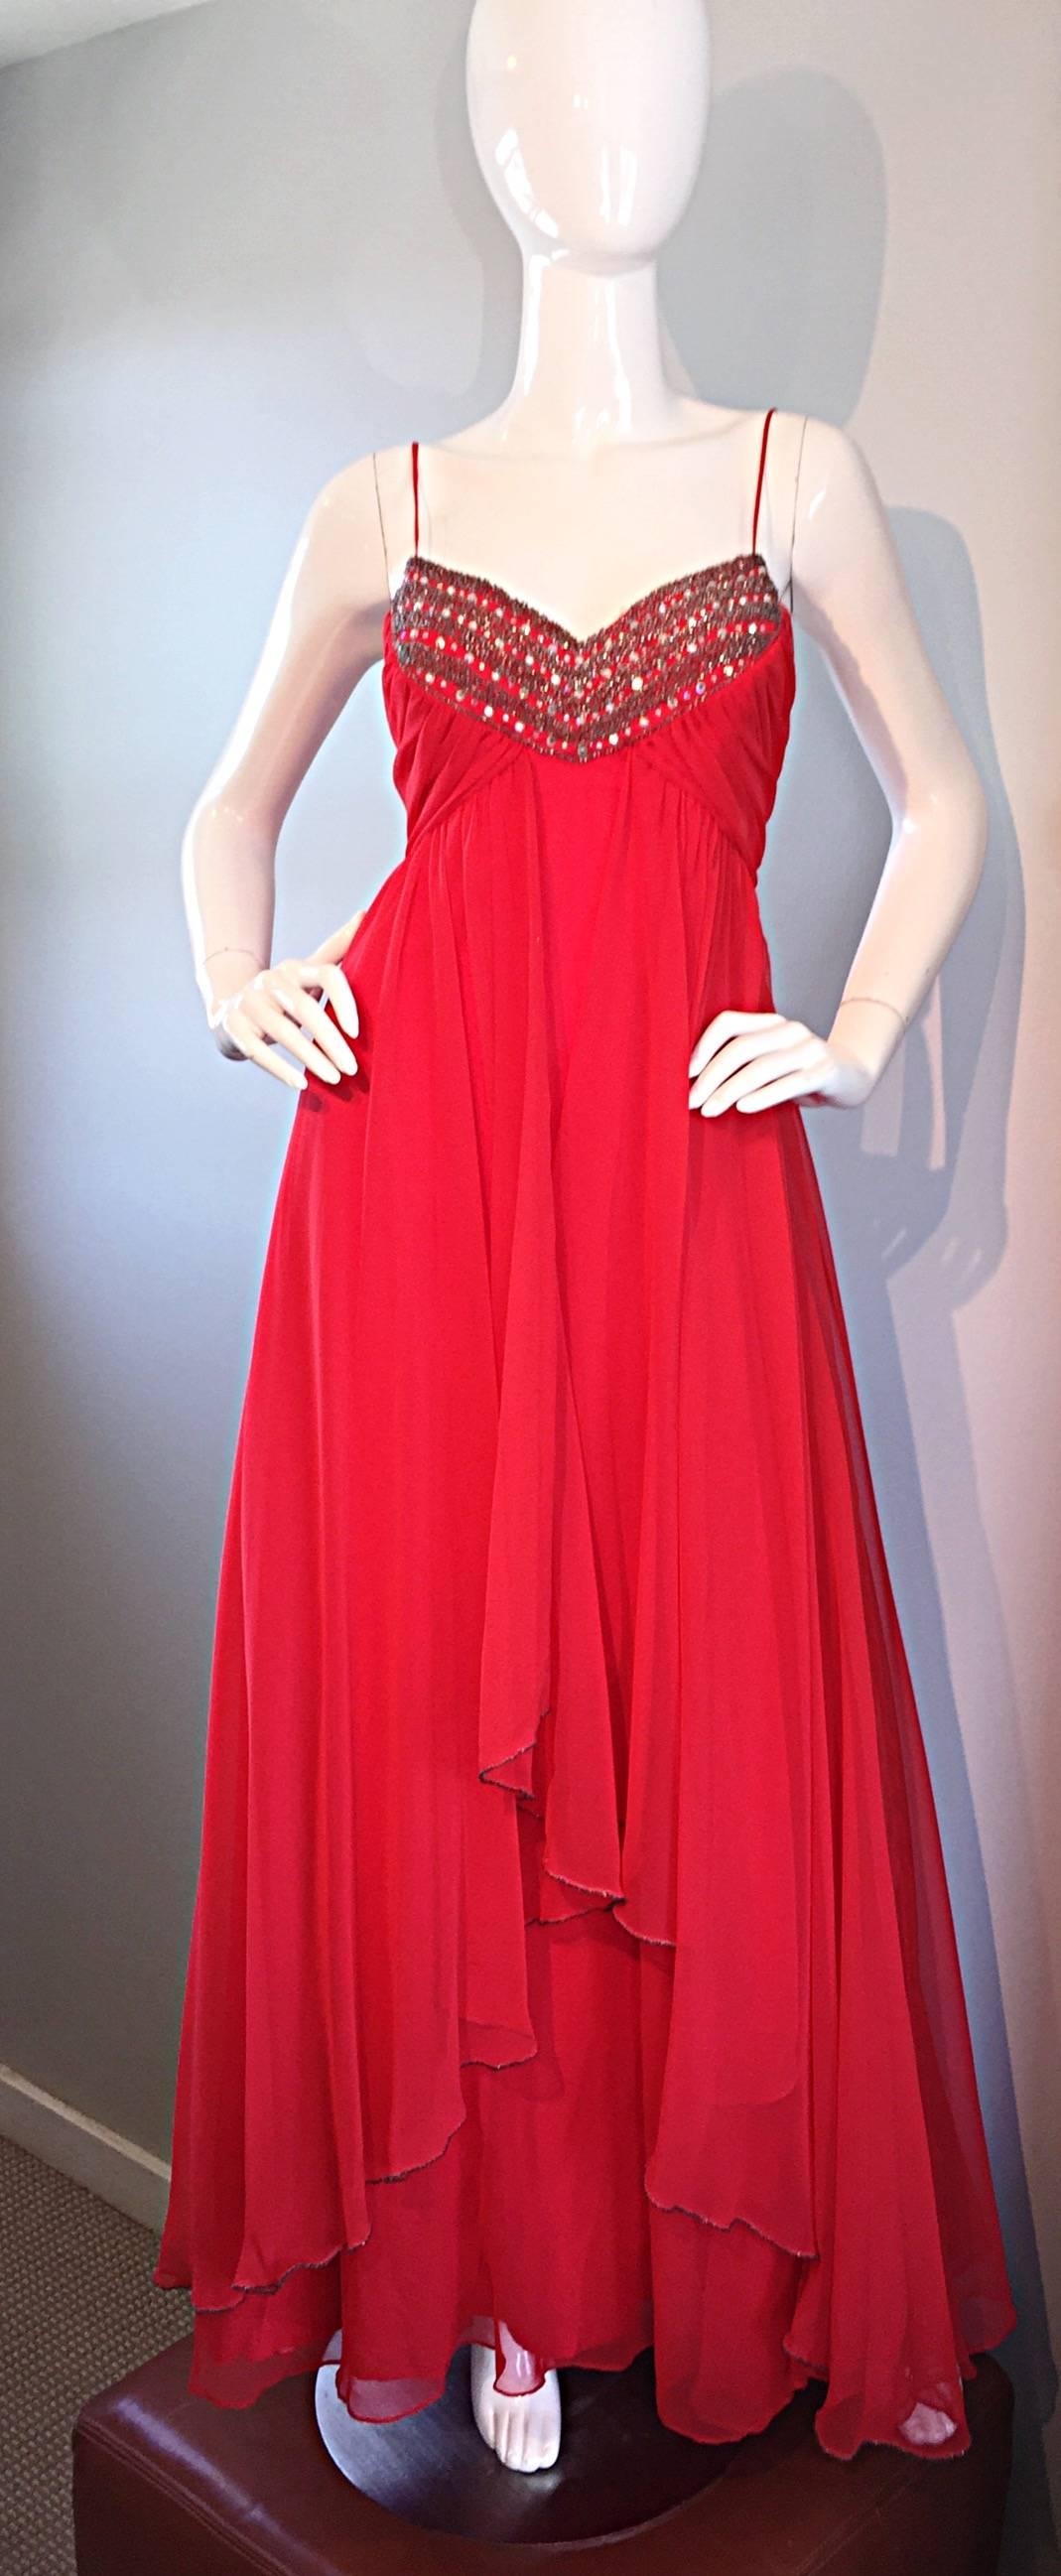 Exquisite 1970s Lipstick Red Chiffon Rhinestone Beaded Vintage 70s Goddess Gown  For Sale 2